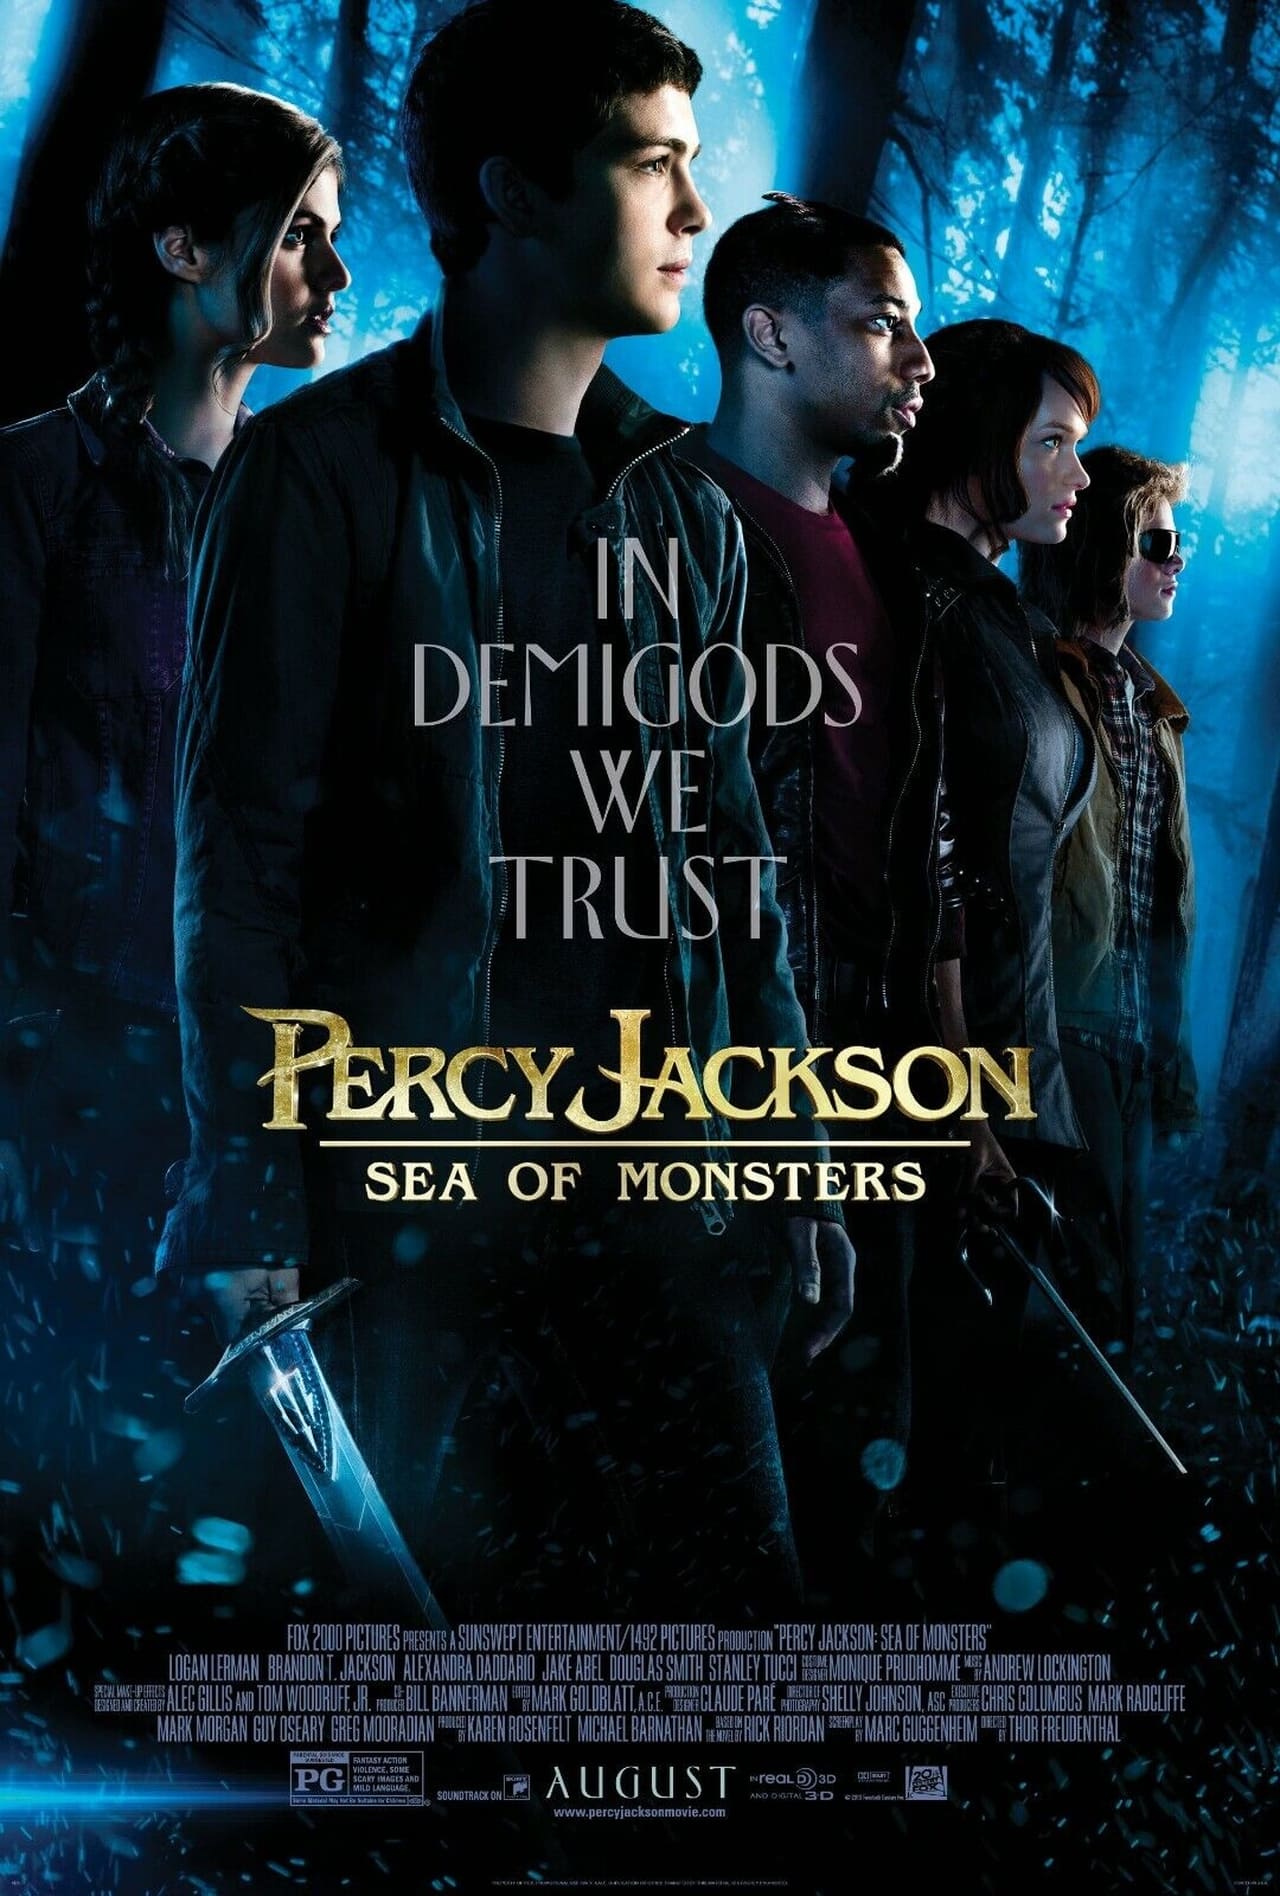 Percy Jackson: Sea of Monsters (2013) 128Kbps 23.976Fps 48Khz 2.0Ch DD+ NF E-AC3 Turkish Audio TAC